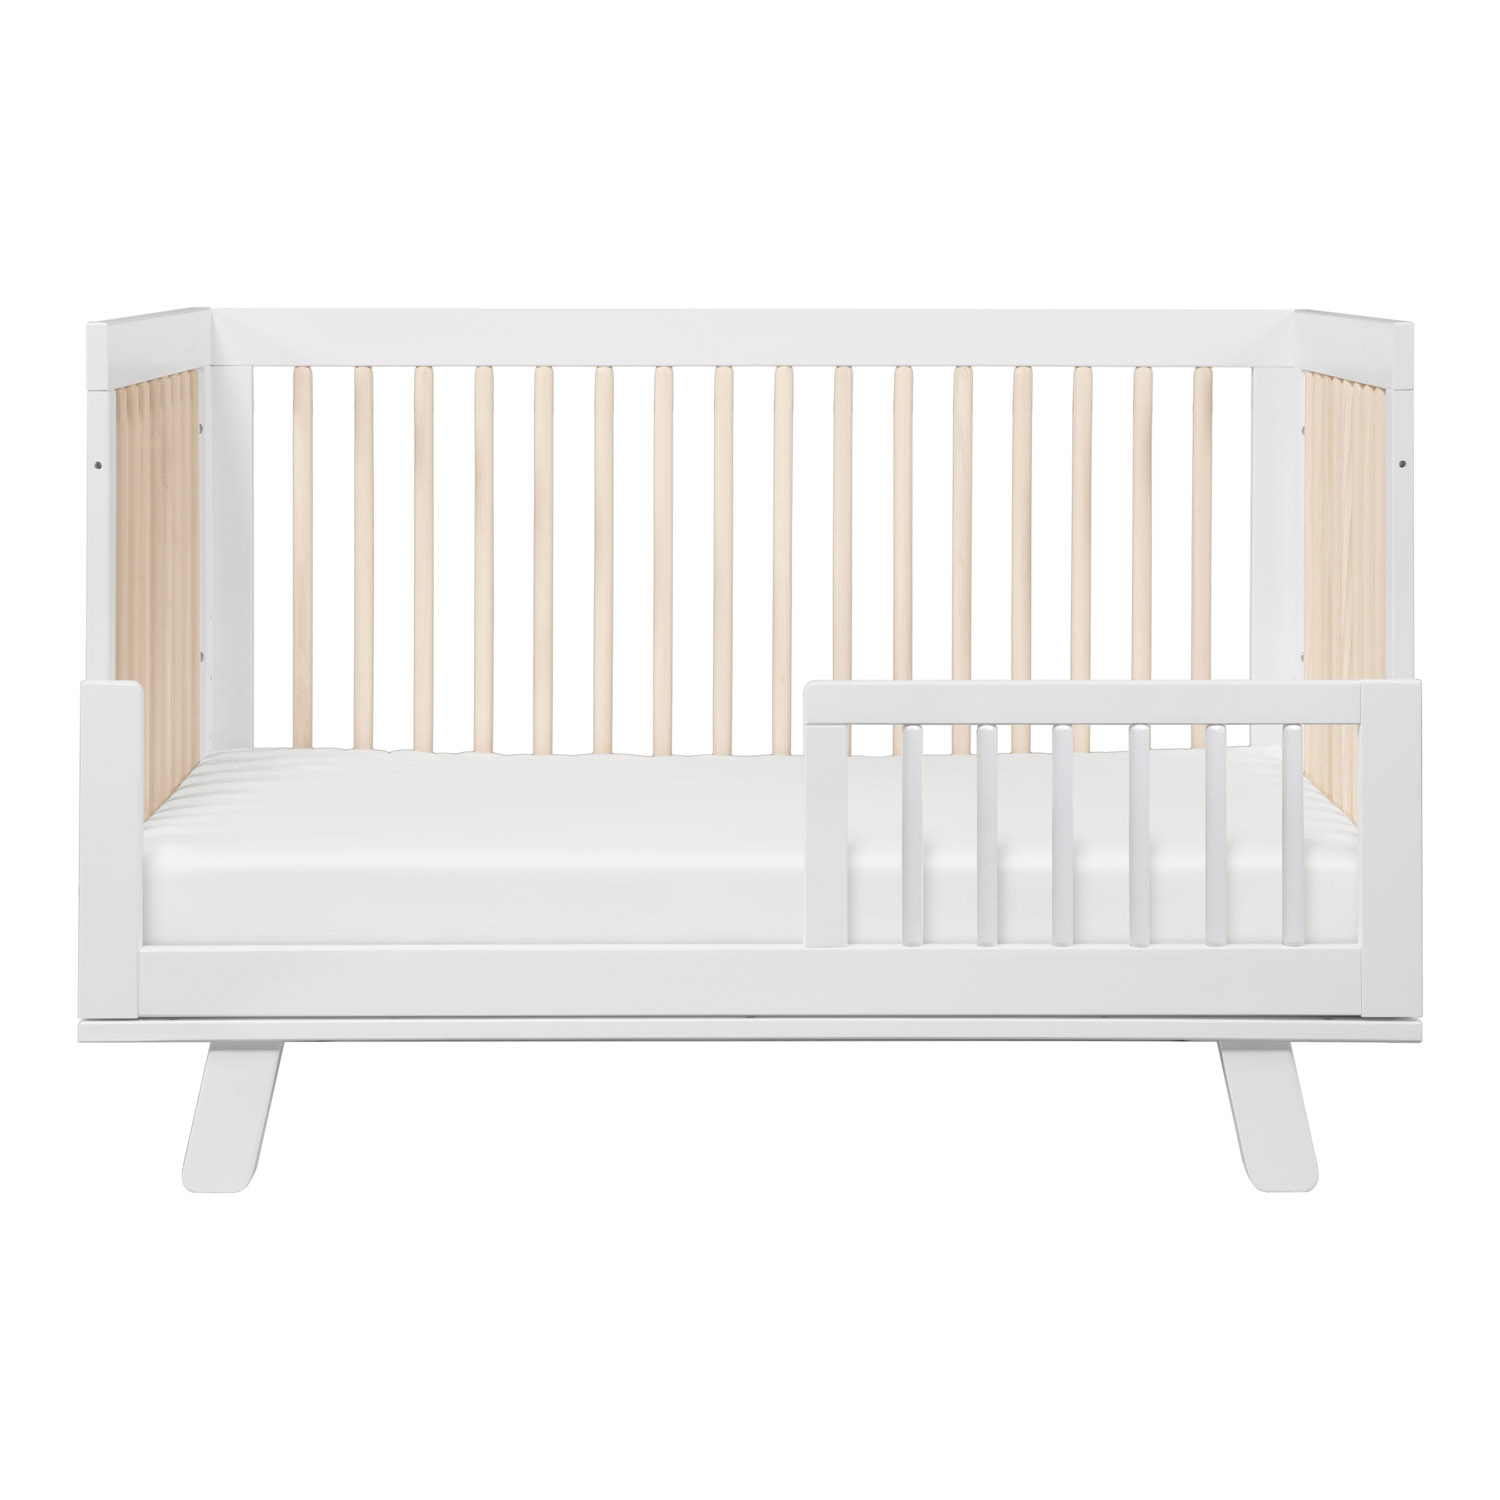 Babyletto Hudson Mid Century Modern White Washed Brown Convertible Crib - Image 3